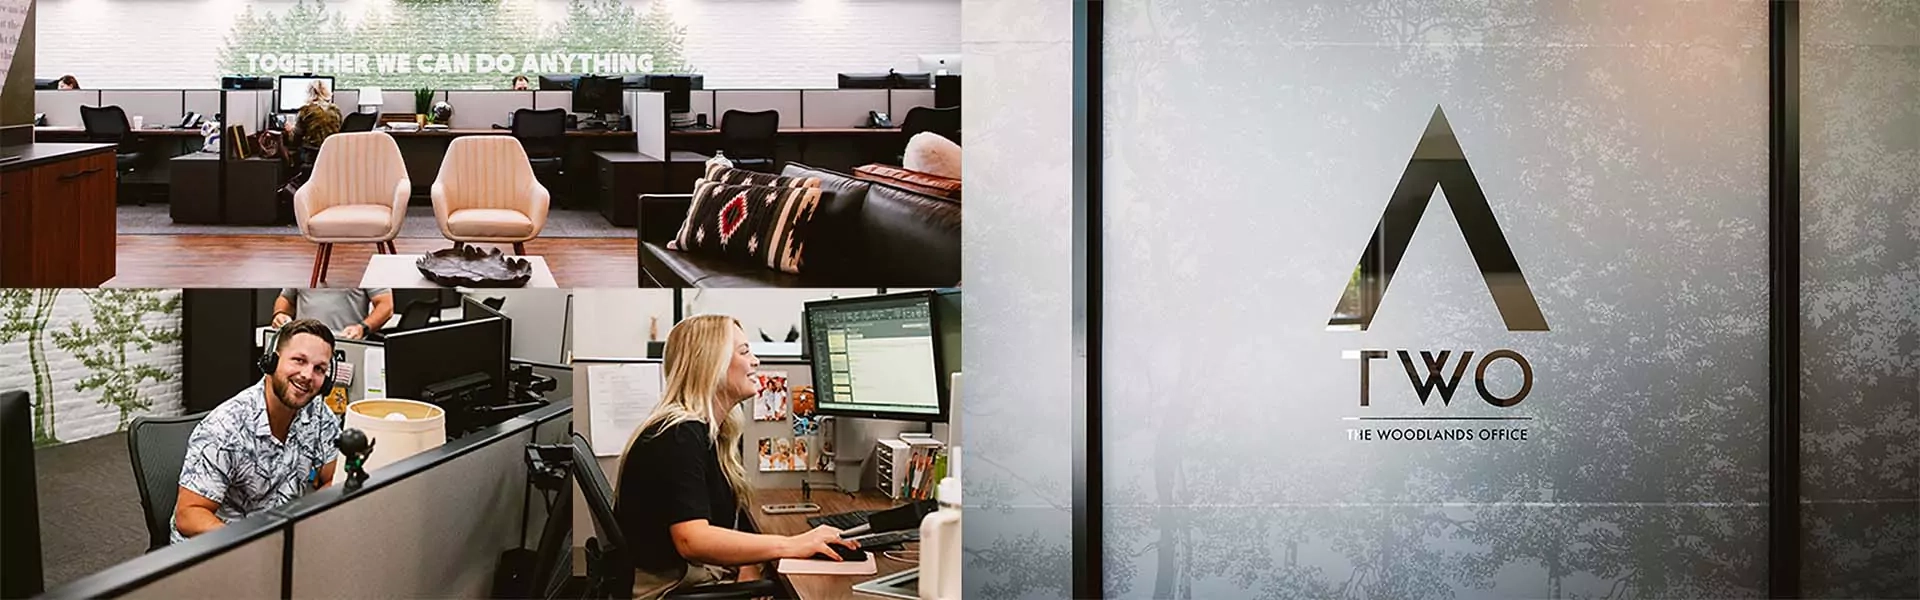 A composite image of scenes from Adcetera’s office in The Woodlands, Texas, including Business Development Director Robbie Ray, Account Executive Jordan Nutt, and the company logo on the frosted glass lobby window. Adcetera is a digital marketing agency.